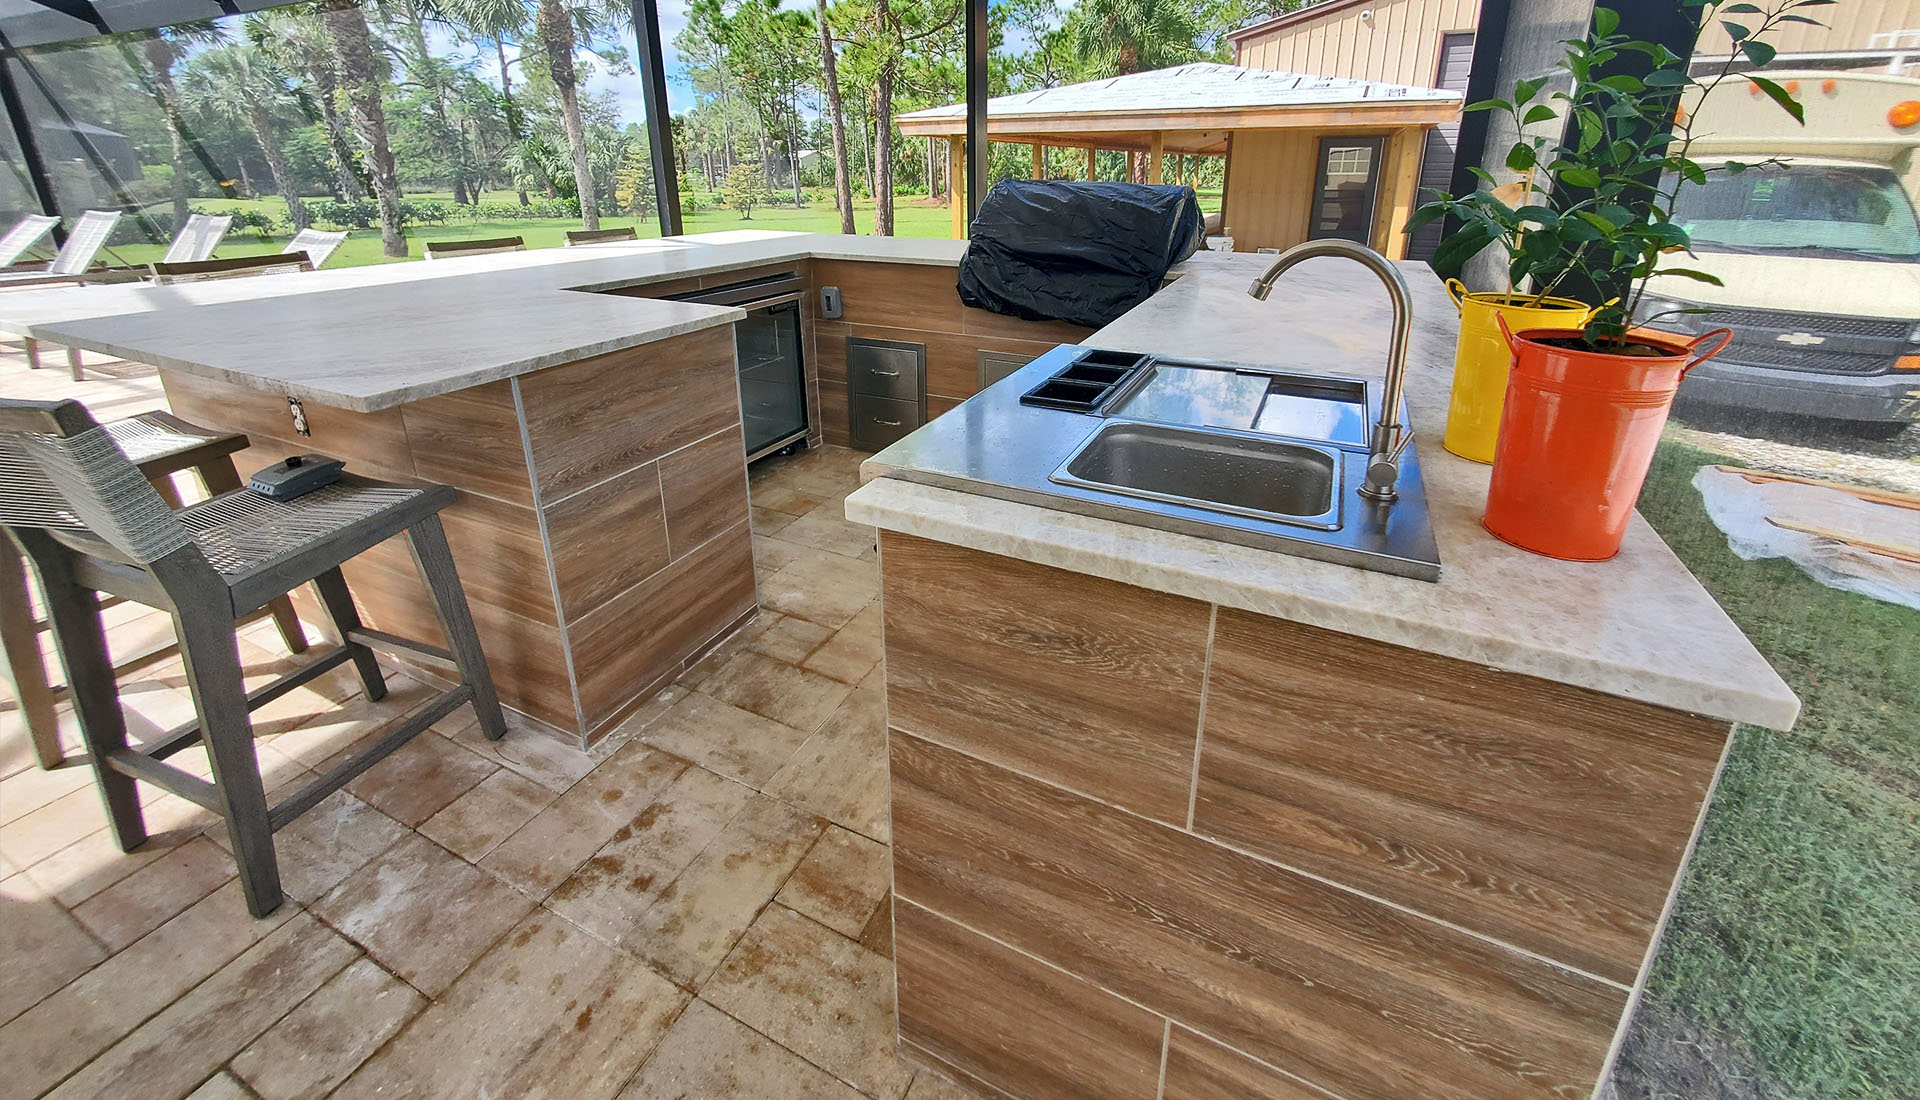 Pool and Deck Concepts Custom Outdoor Kitchen design